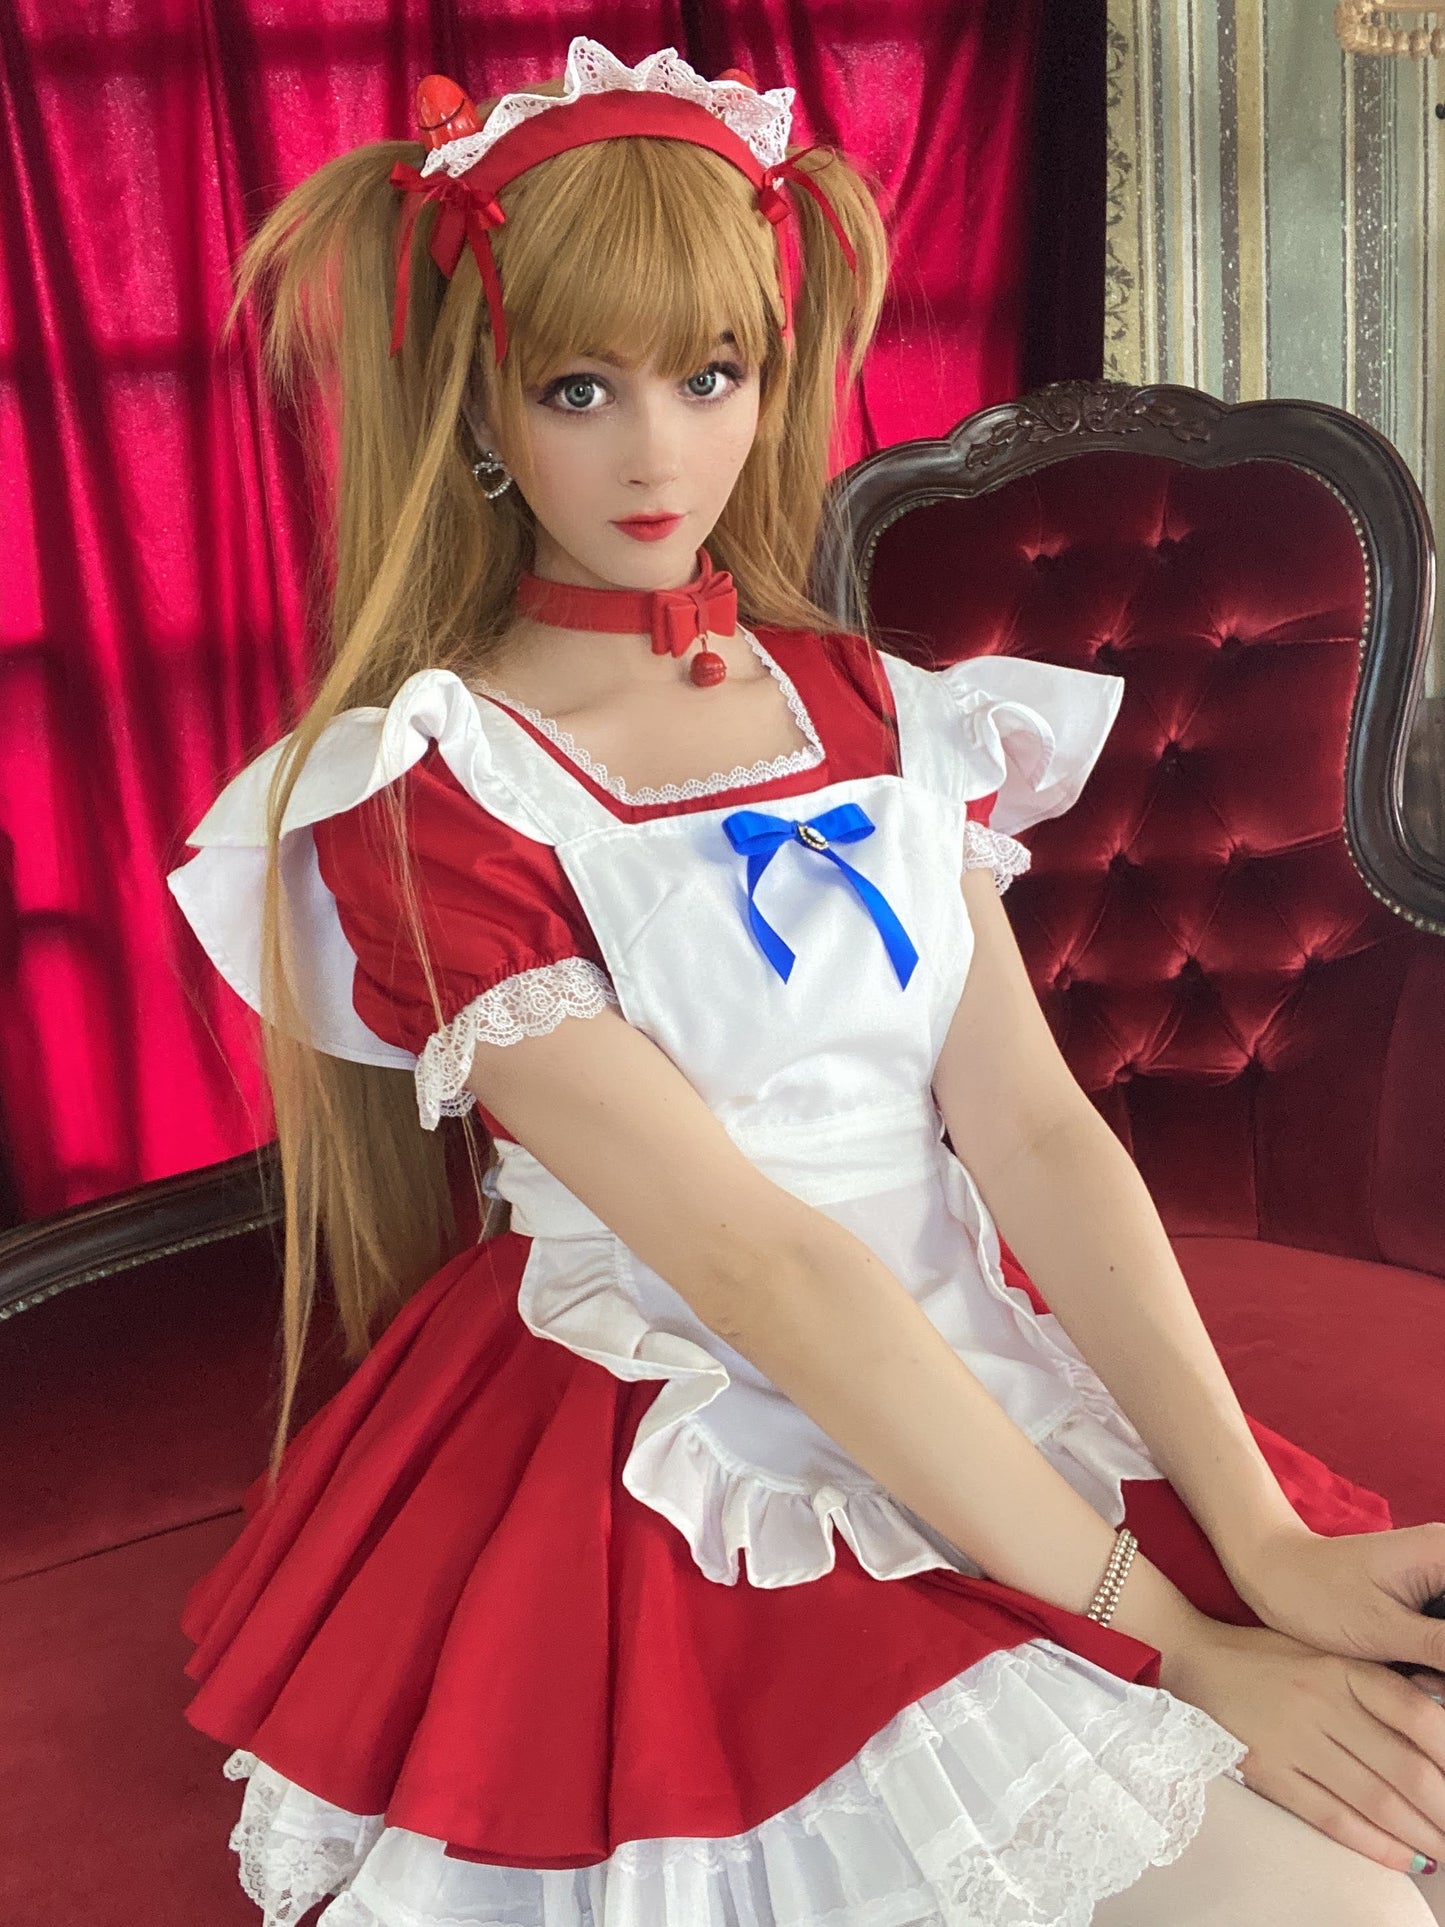 Asuka Maid Selfie - patreon only